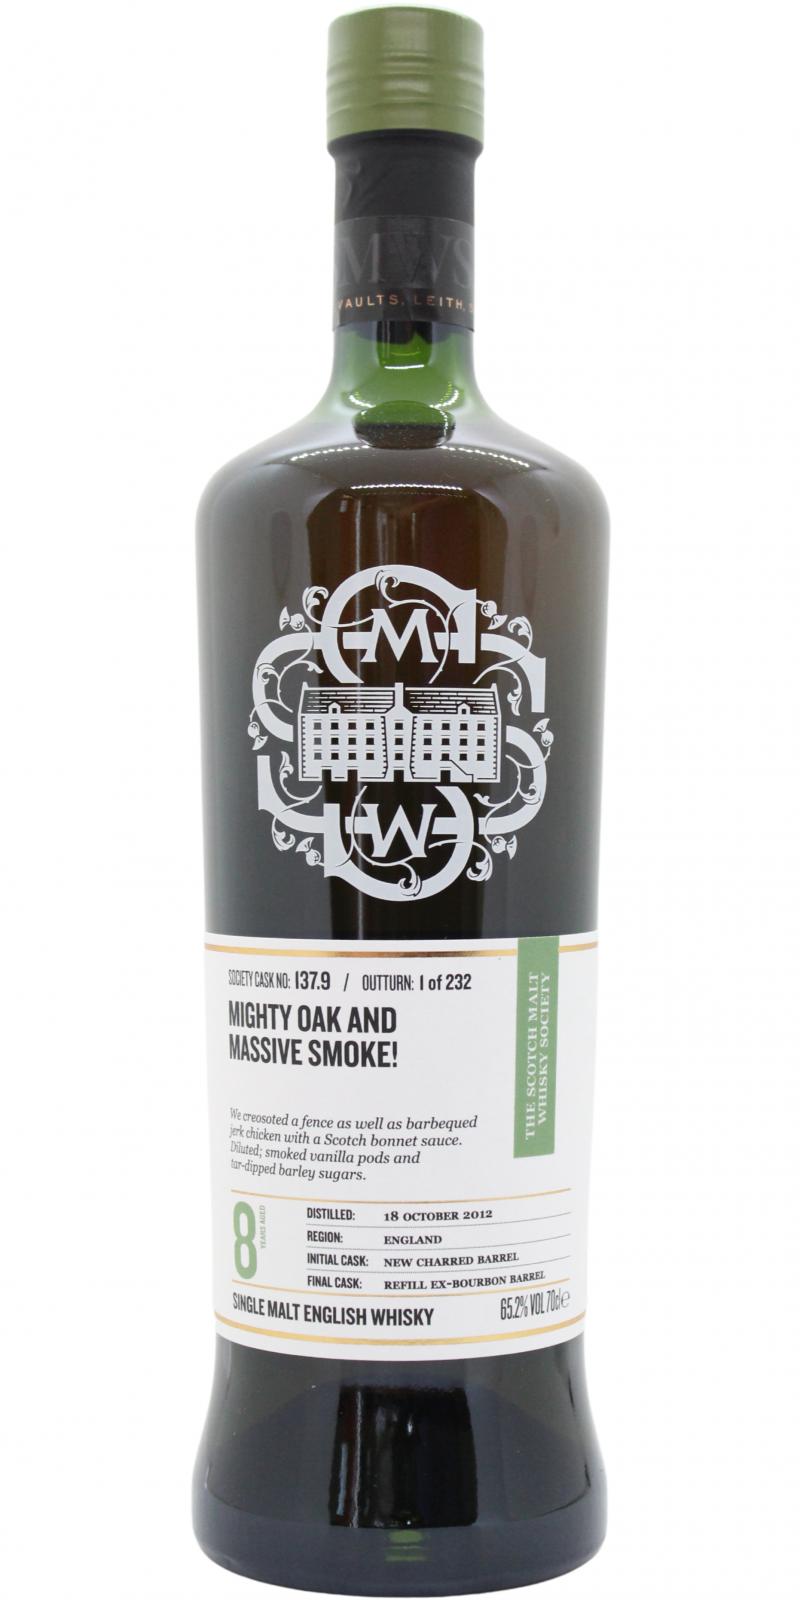 The English Whisky 2012 SMWS 137.9